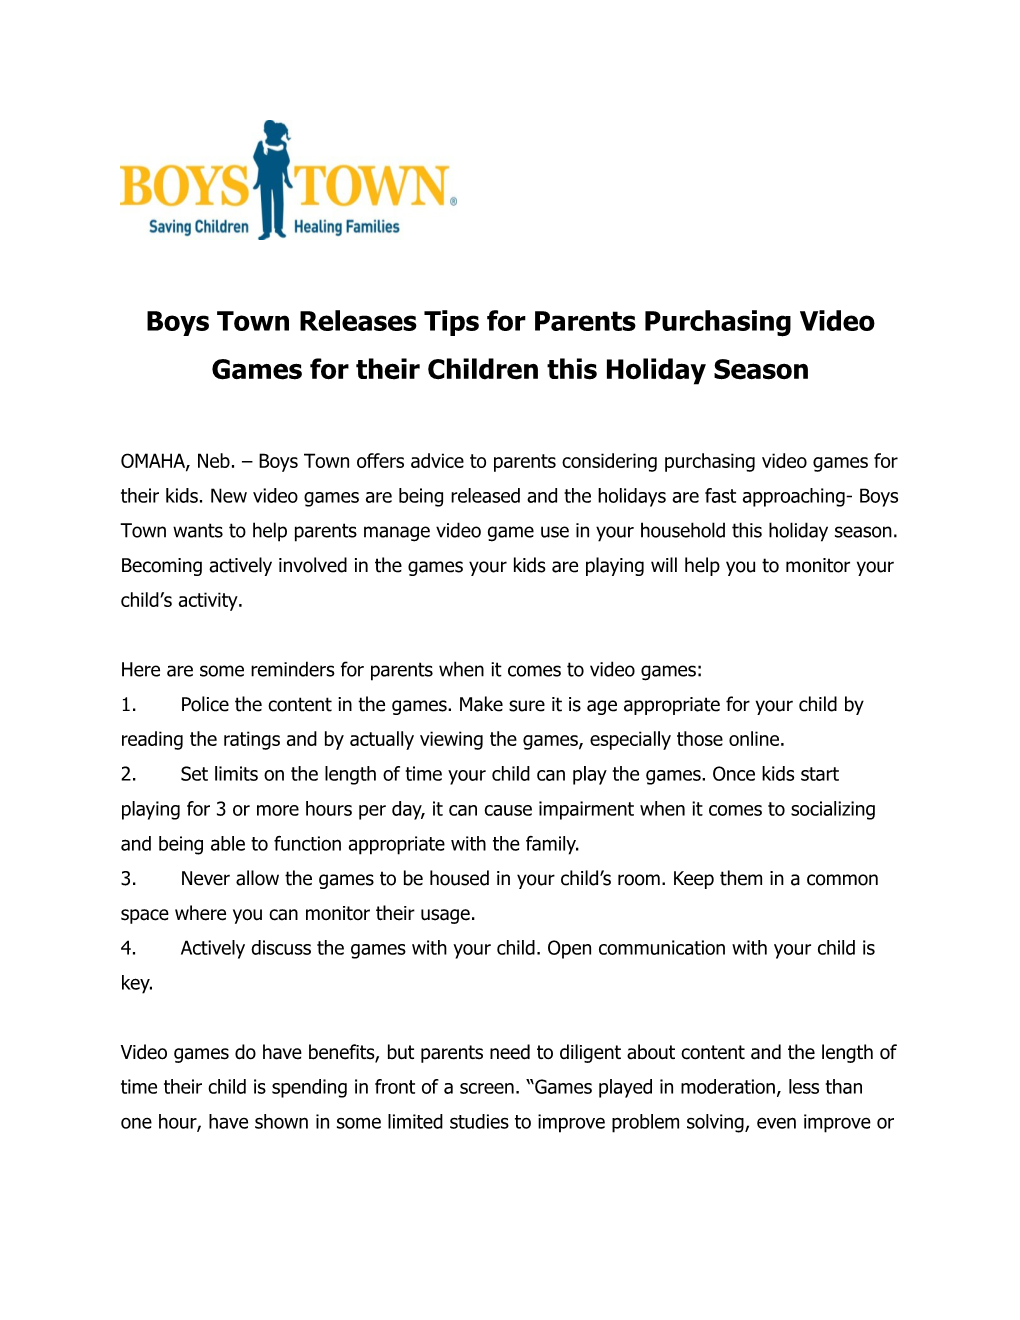 Boys Townreleases Tips for Parents Purchasing Video Games for Their Children This Holiday